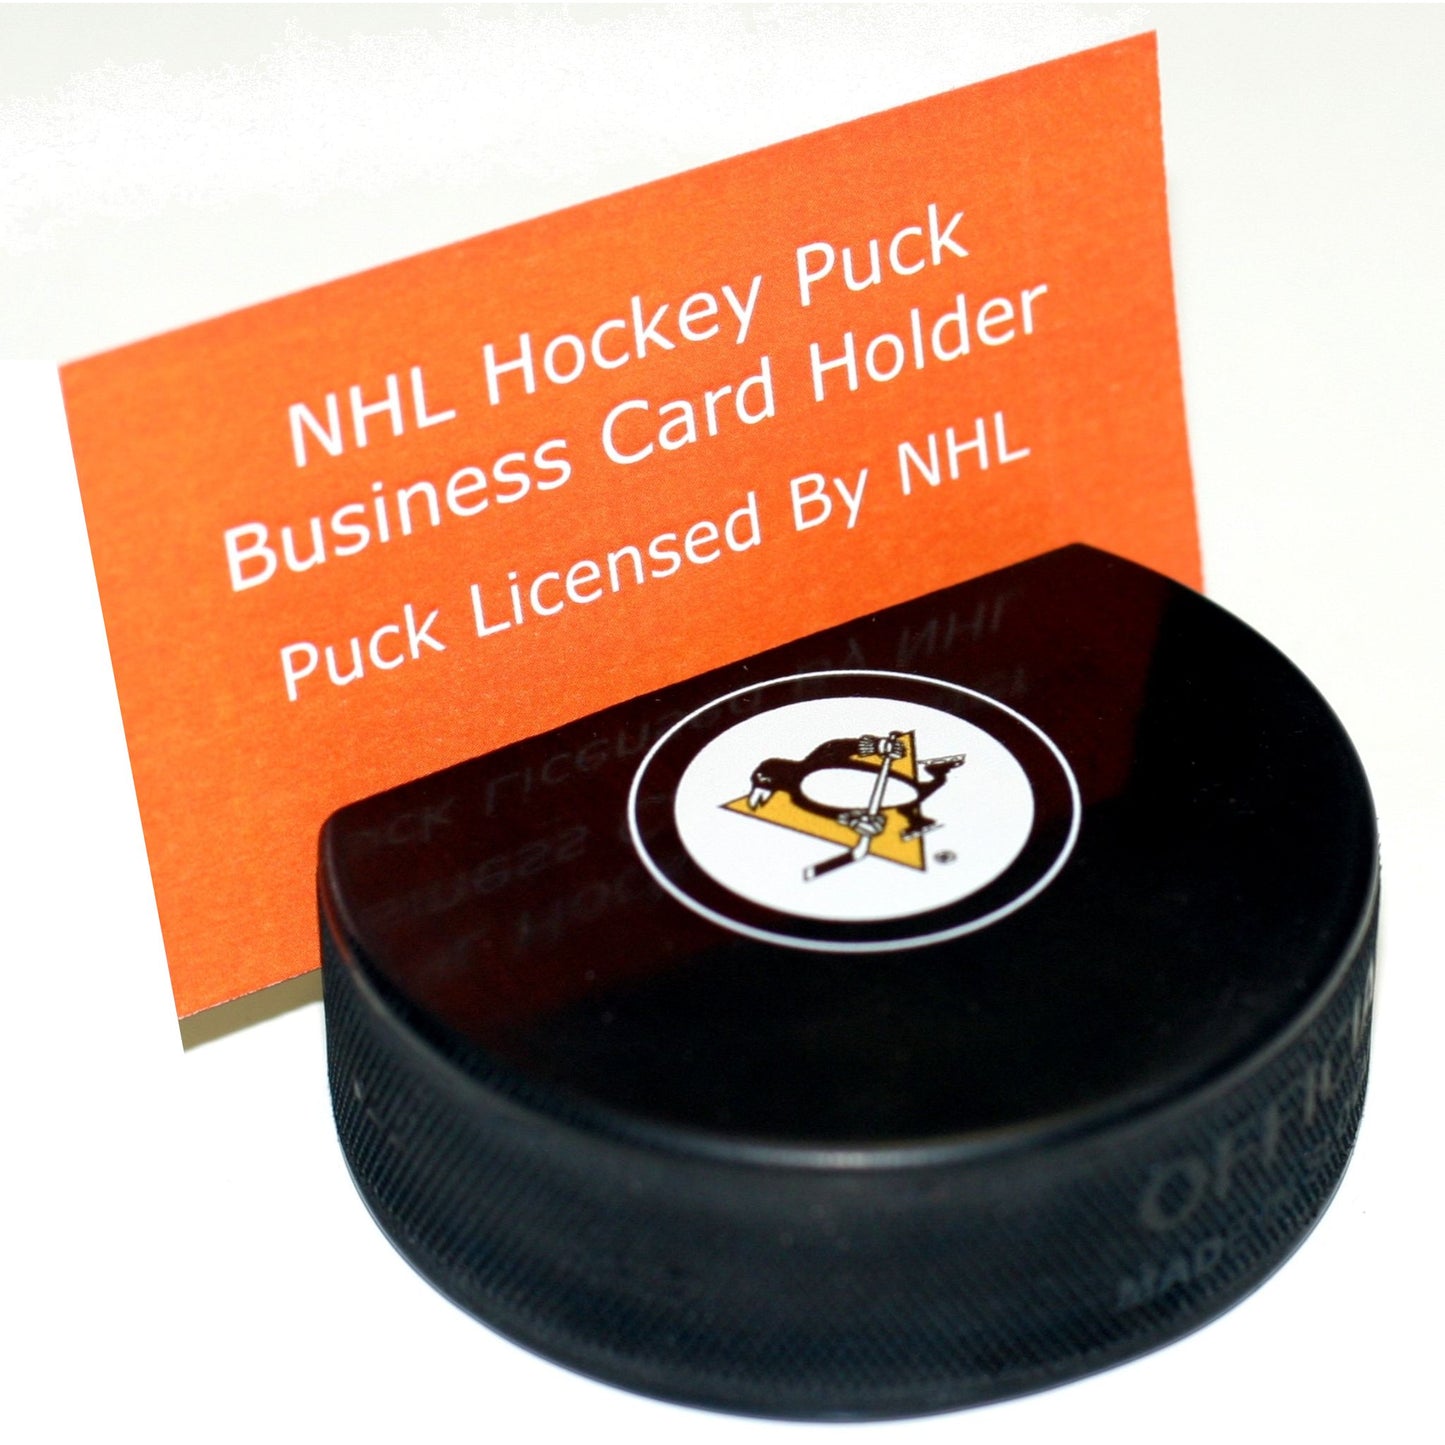 Pittsburgh Penguins Autograph Series Hockey Puck Business Card Holder